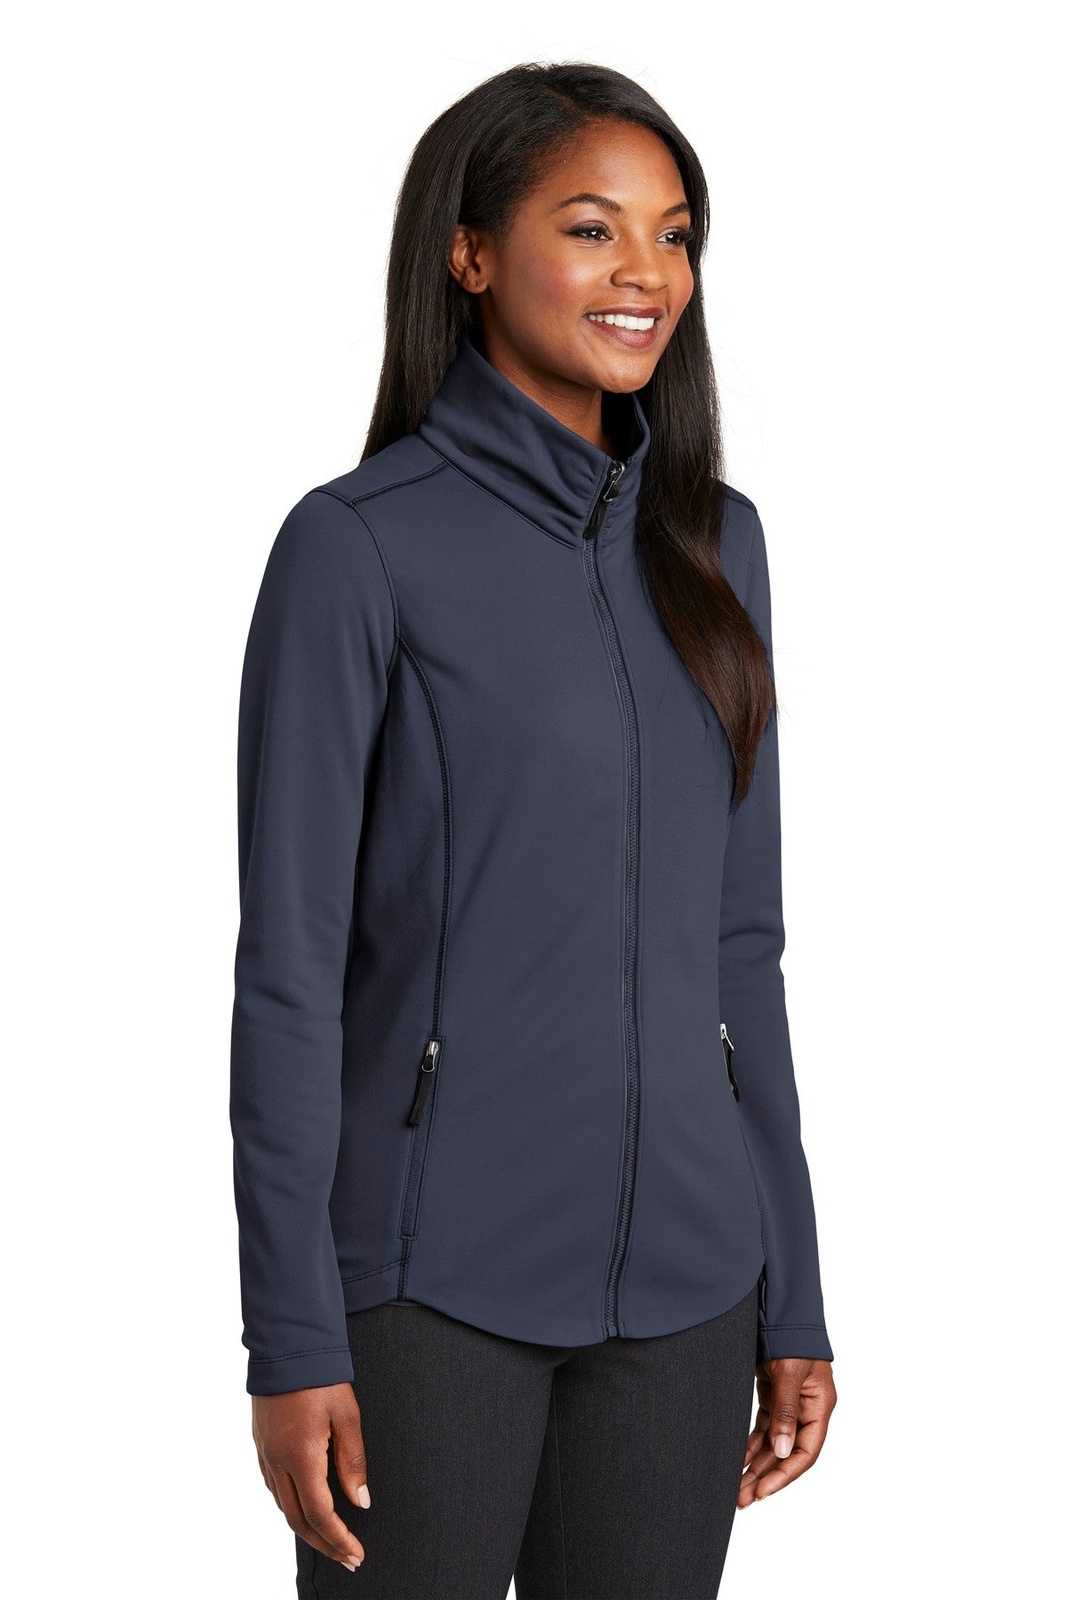 Port Authority L904 Ladies Collective Smooth Fleece Jacket - River Blue Navy - HIT a Double - 4